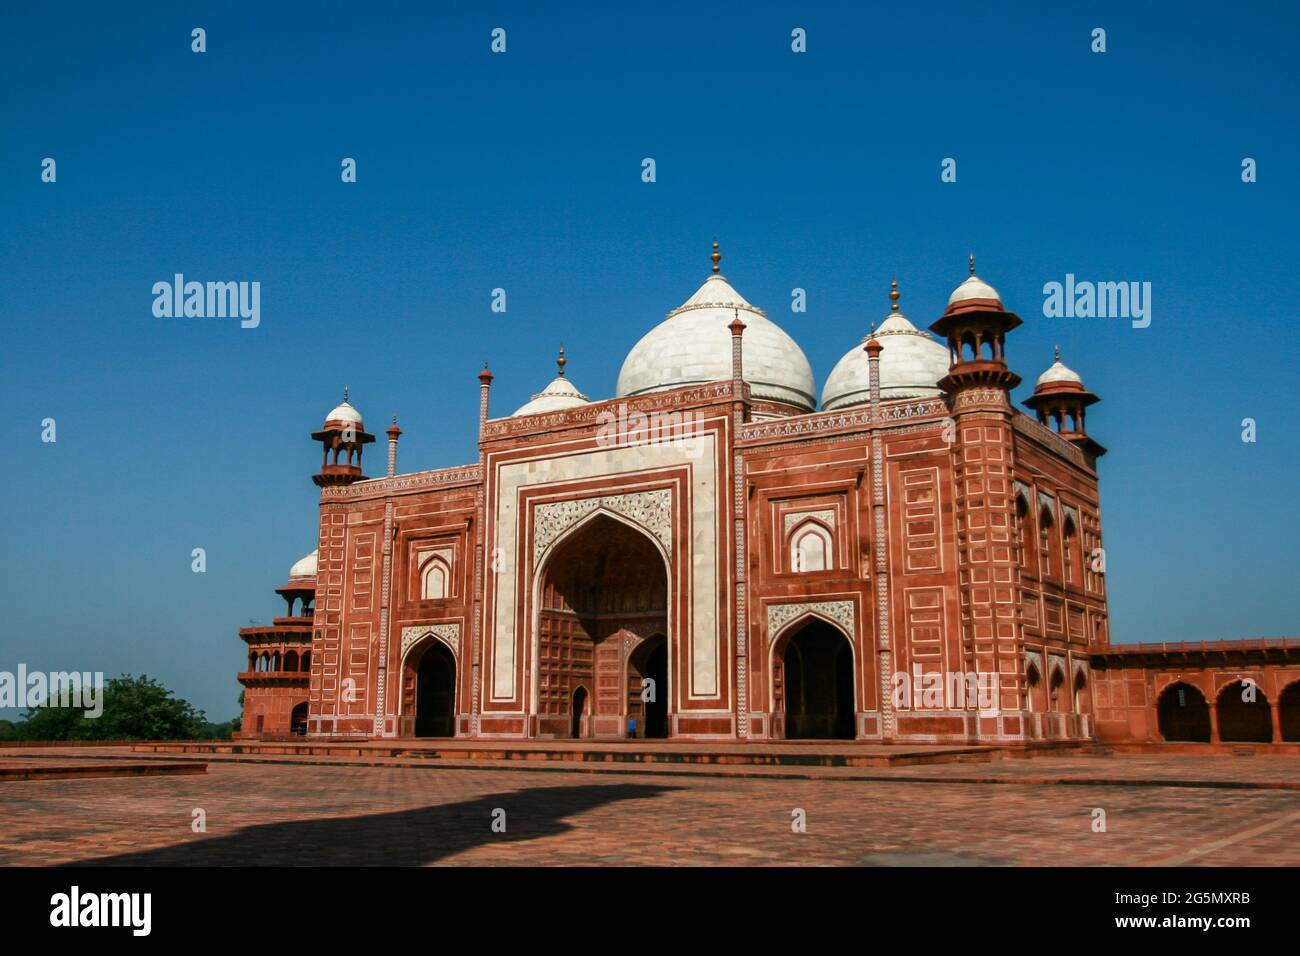 The Mosque for the Mughal Emperor Akbar to pray in Taj Mahal area, Agra, India Stock Photo